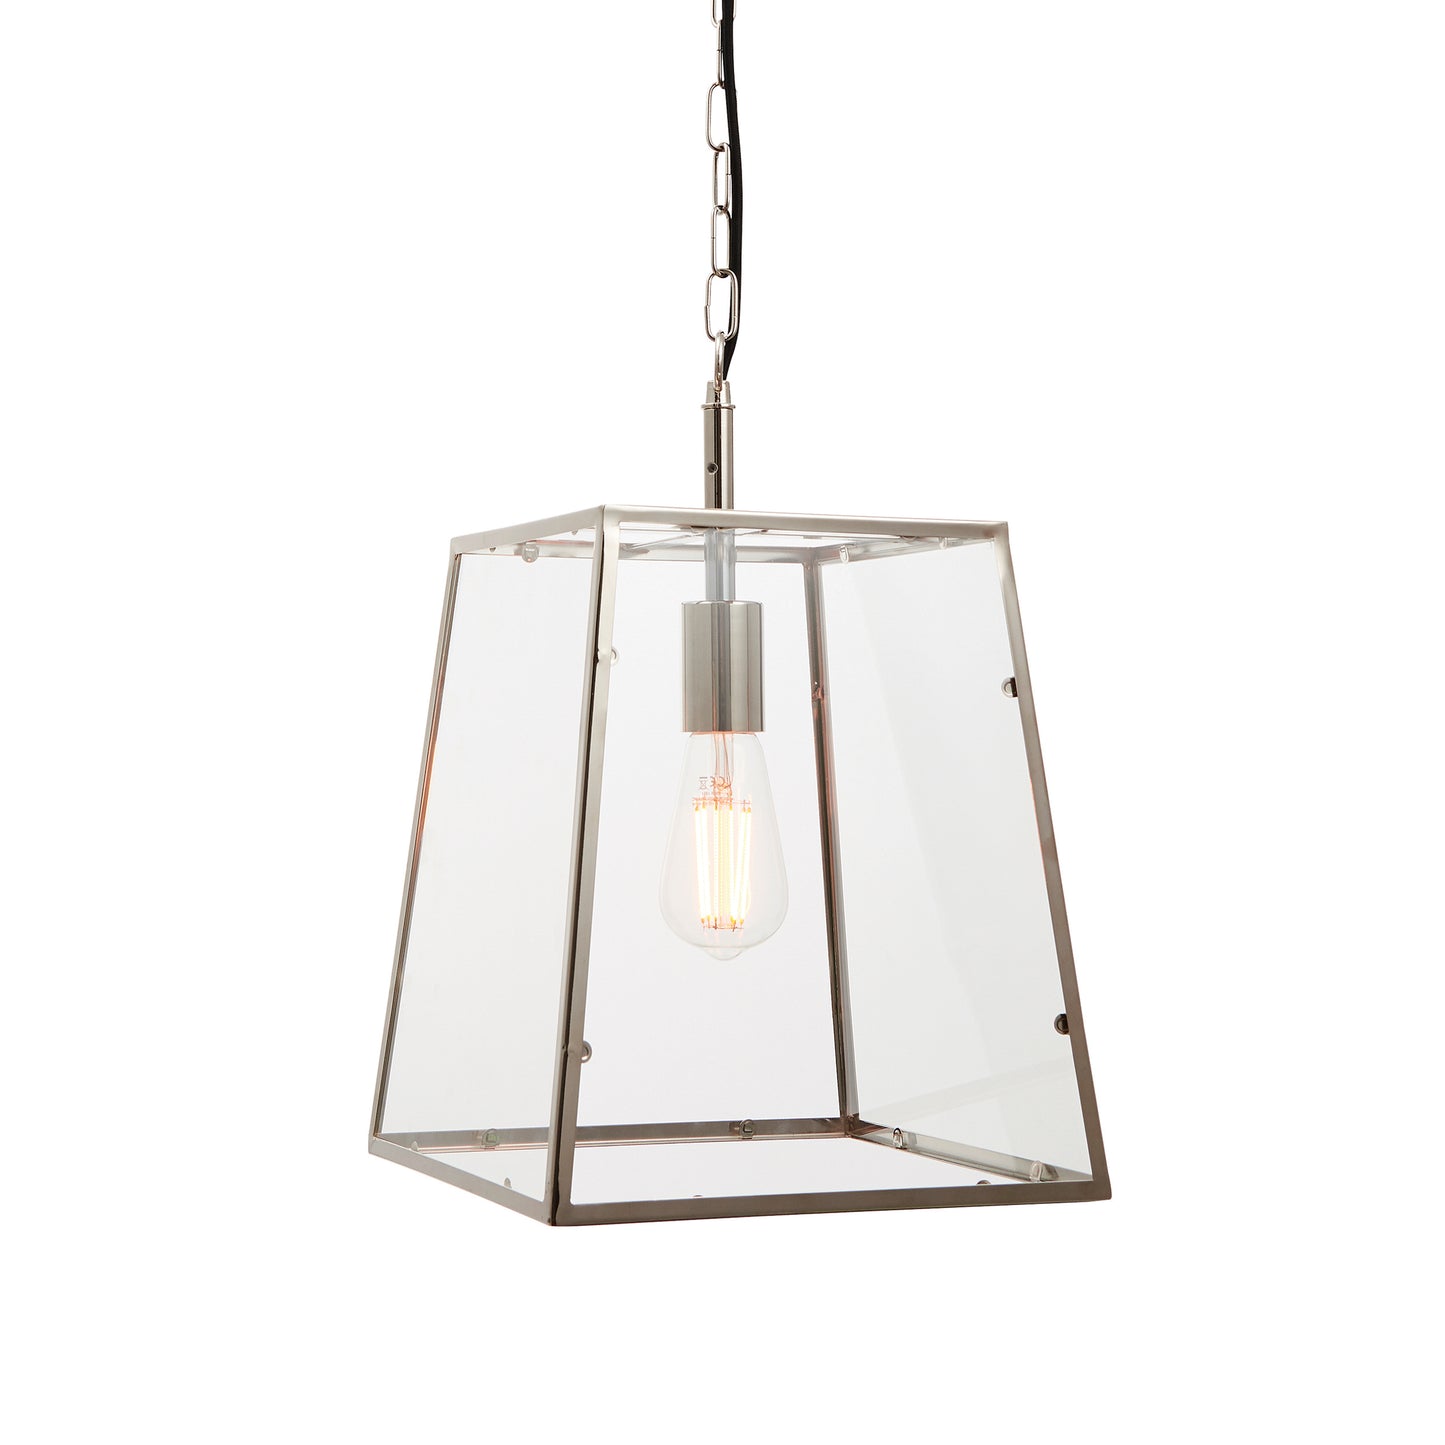 A Nickel Pendant Light for interior decor from Kikiathome.co.uk.